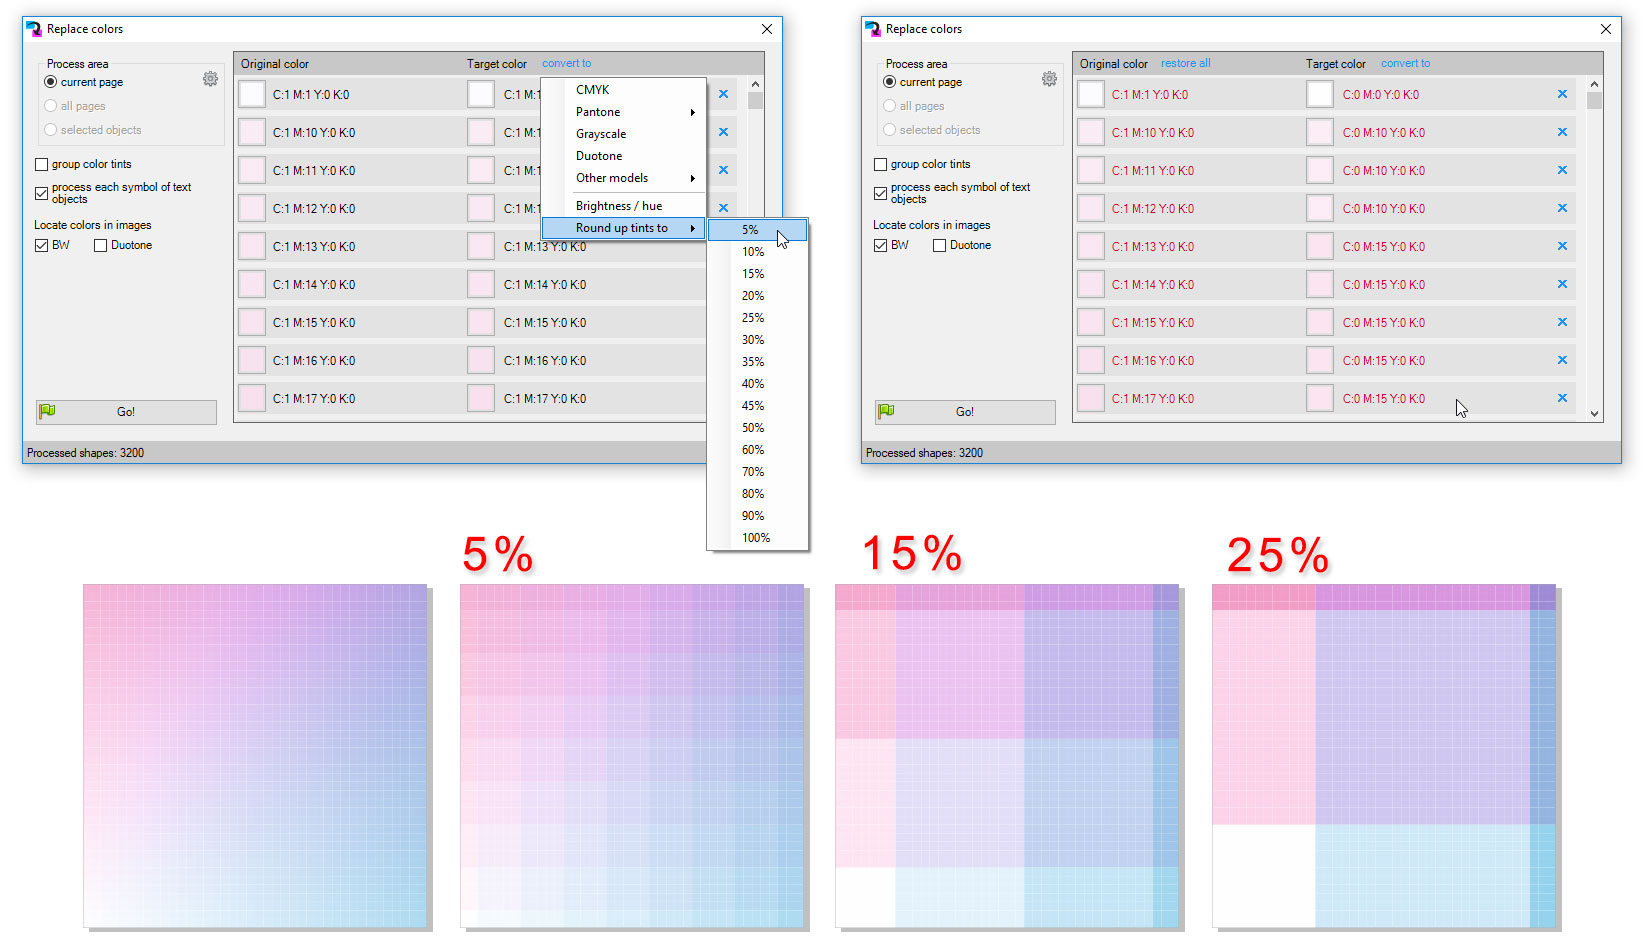 ReproScripts Core Replace colors plugin ~ roundup tints in colors